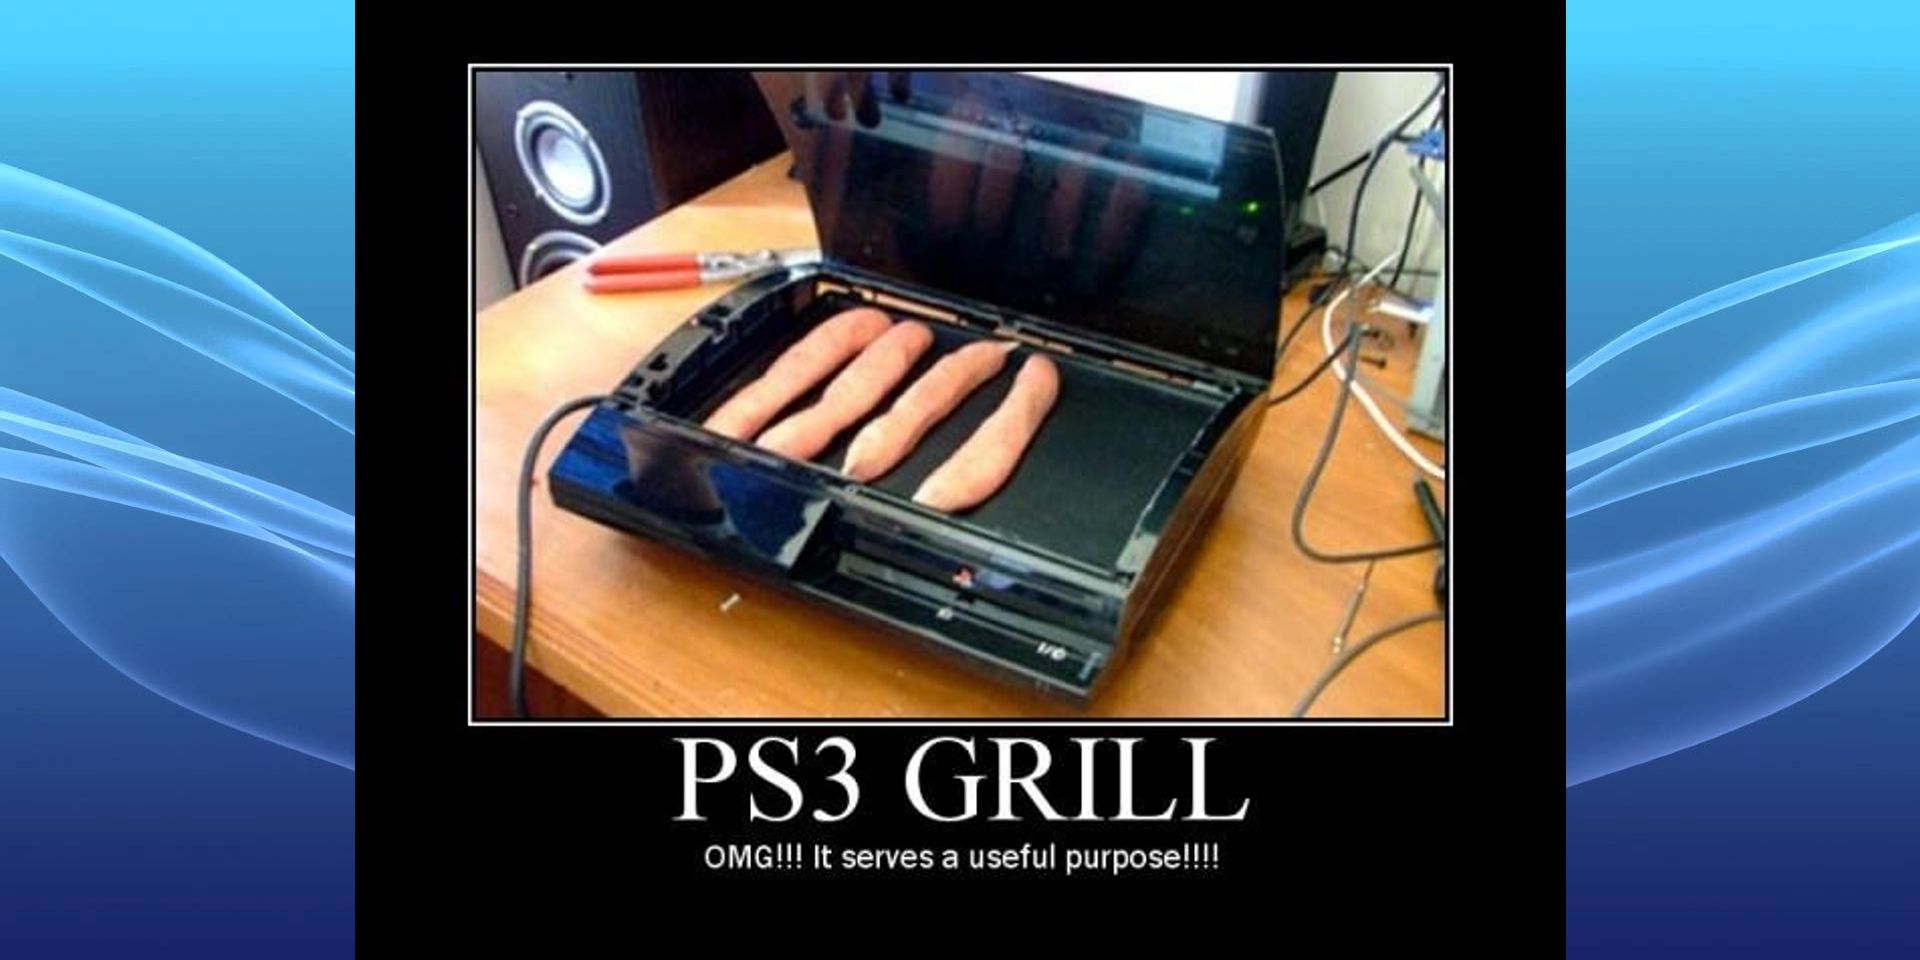 PlayStation 3 - It Only Does Everything